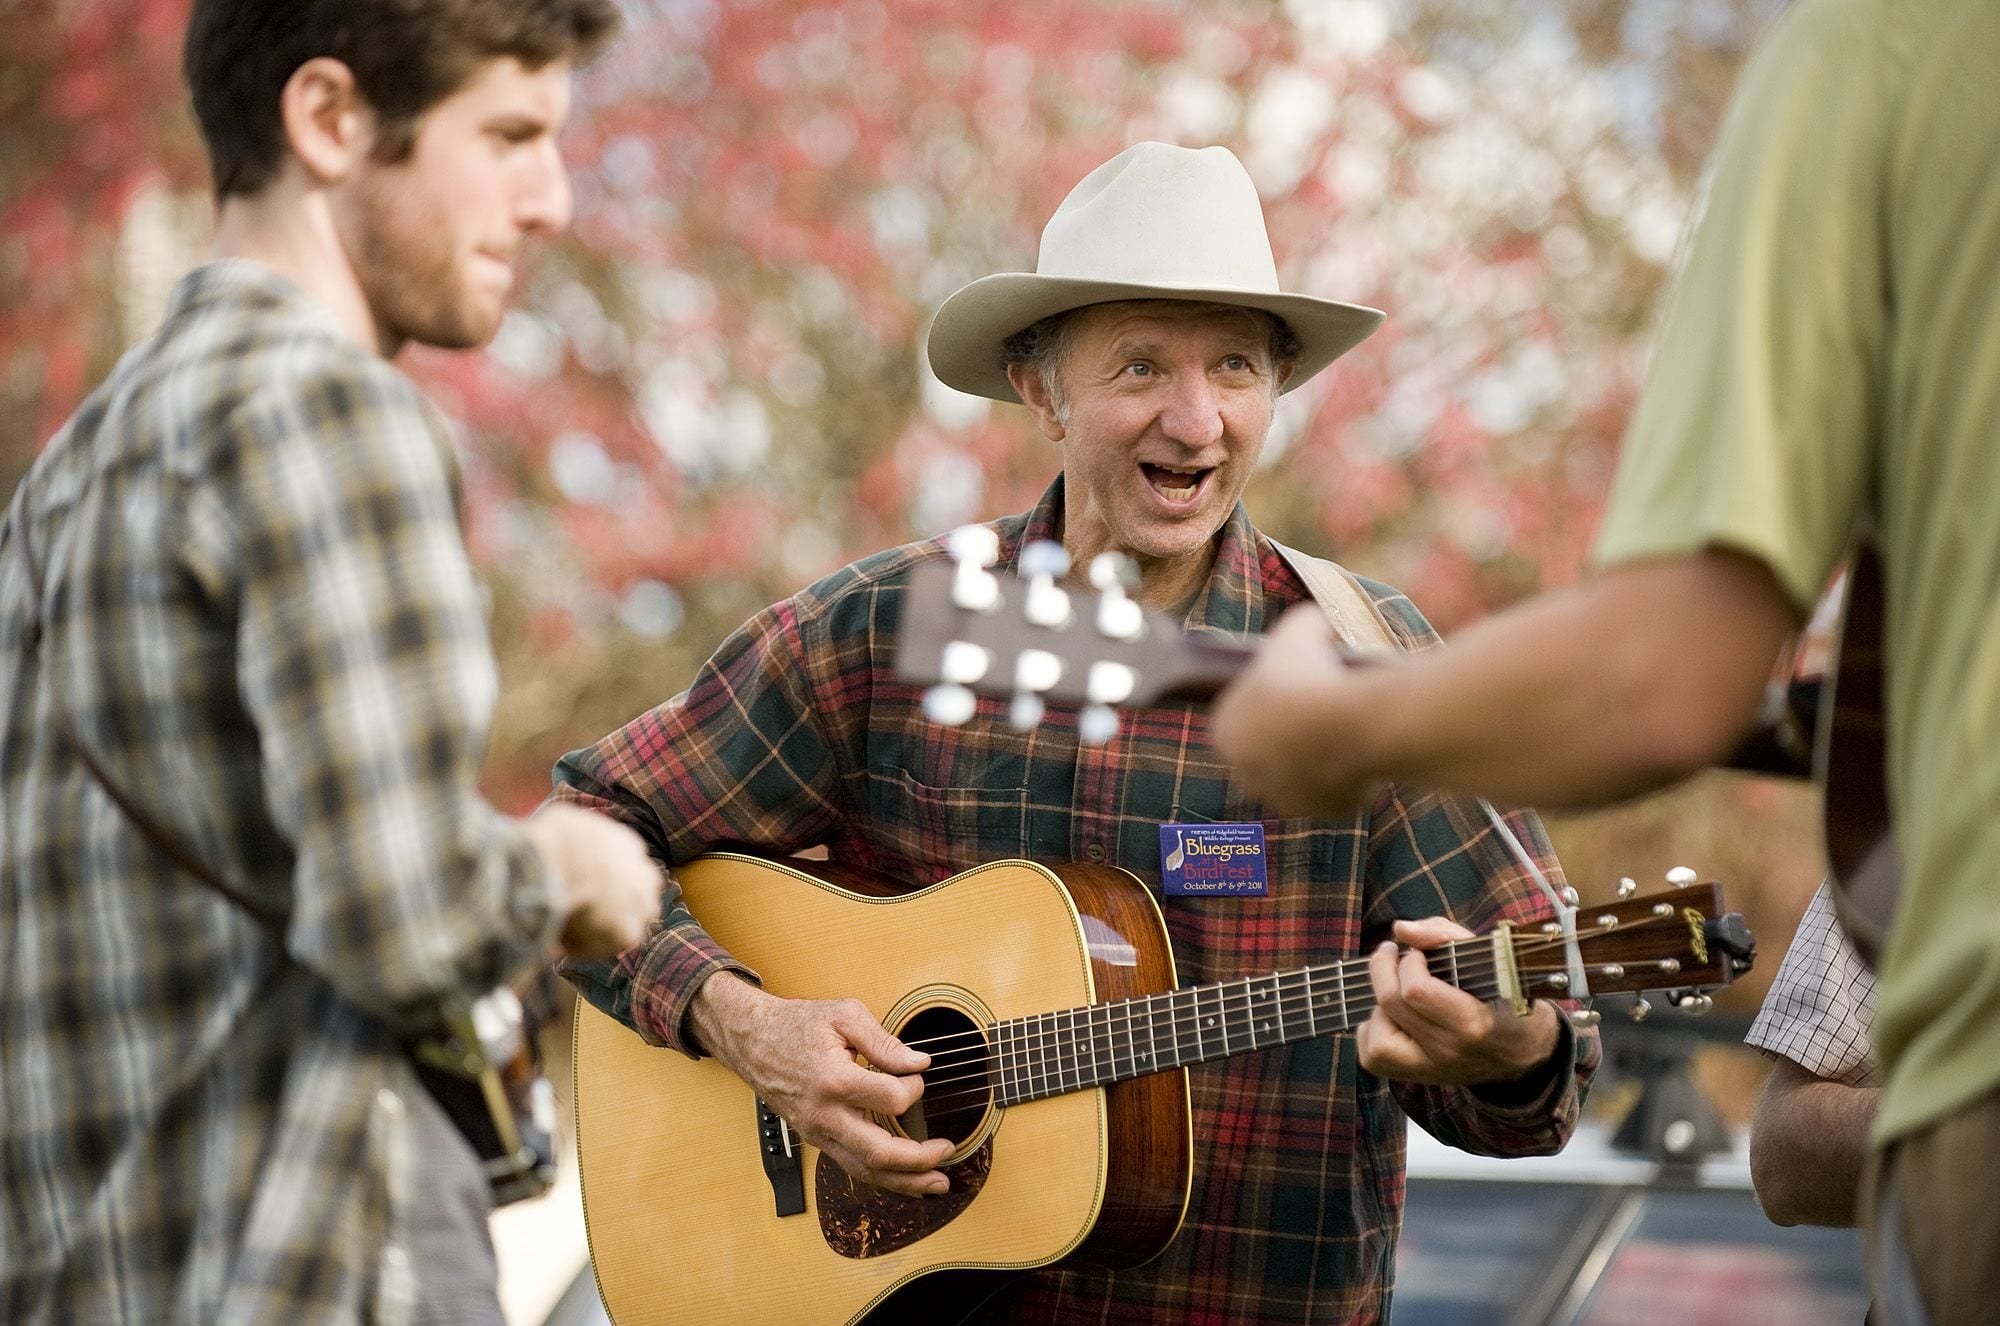 Fred Coates, center, jams with new friends at BirdFest and Bluegrass Saturday in Ridgefield.